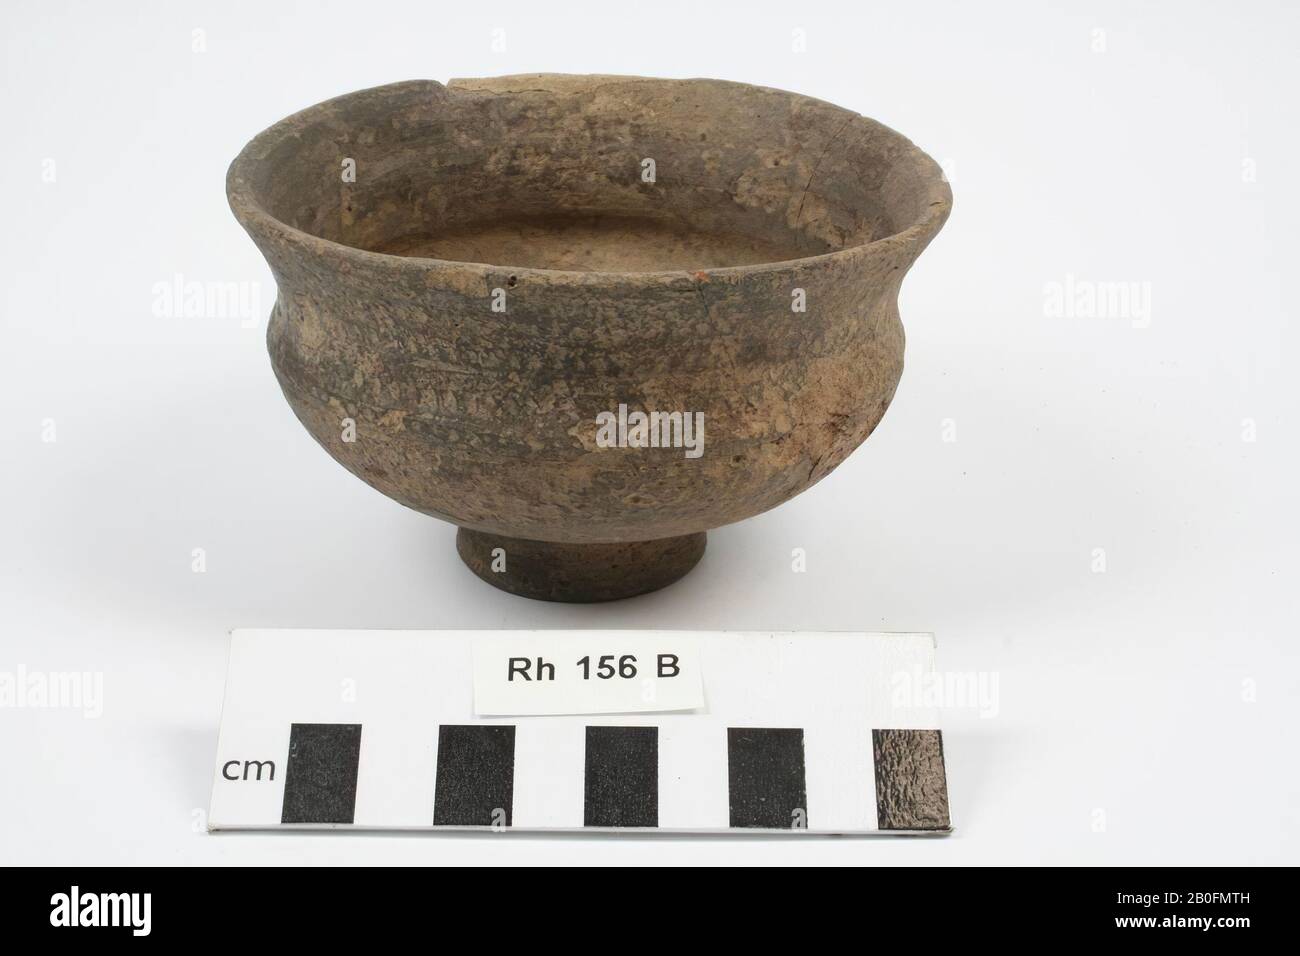 Bowl or footplate of smooth-walled Frankish pottery, convex Stock Photo